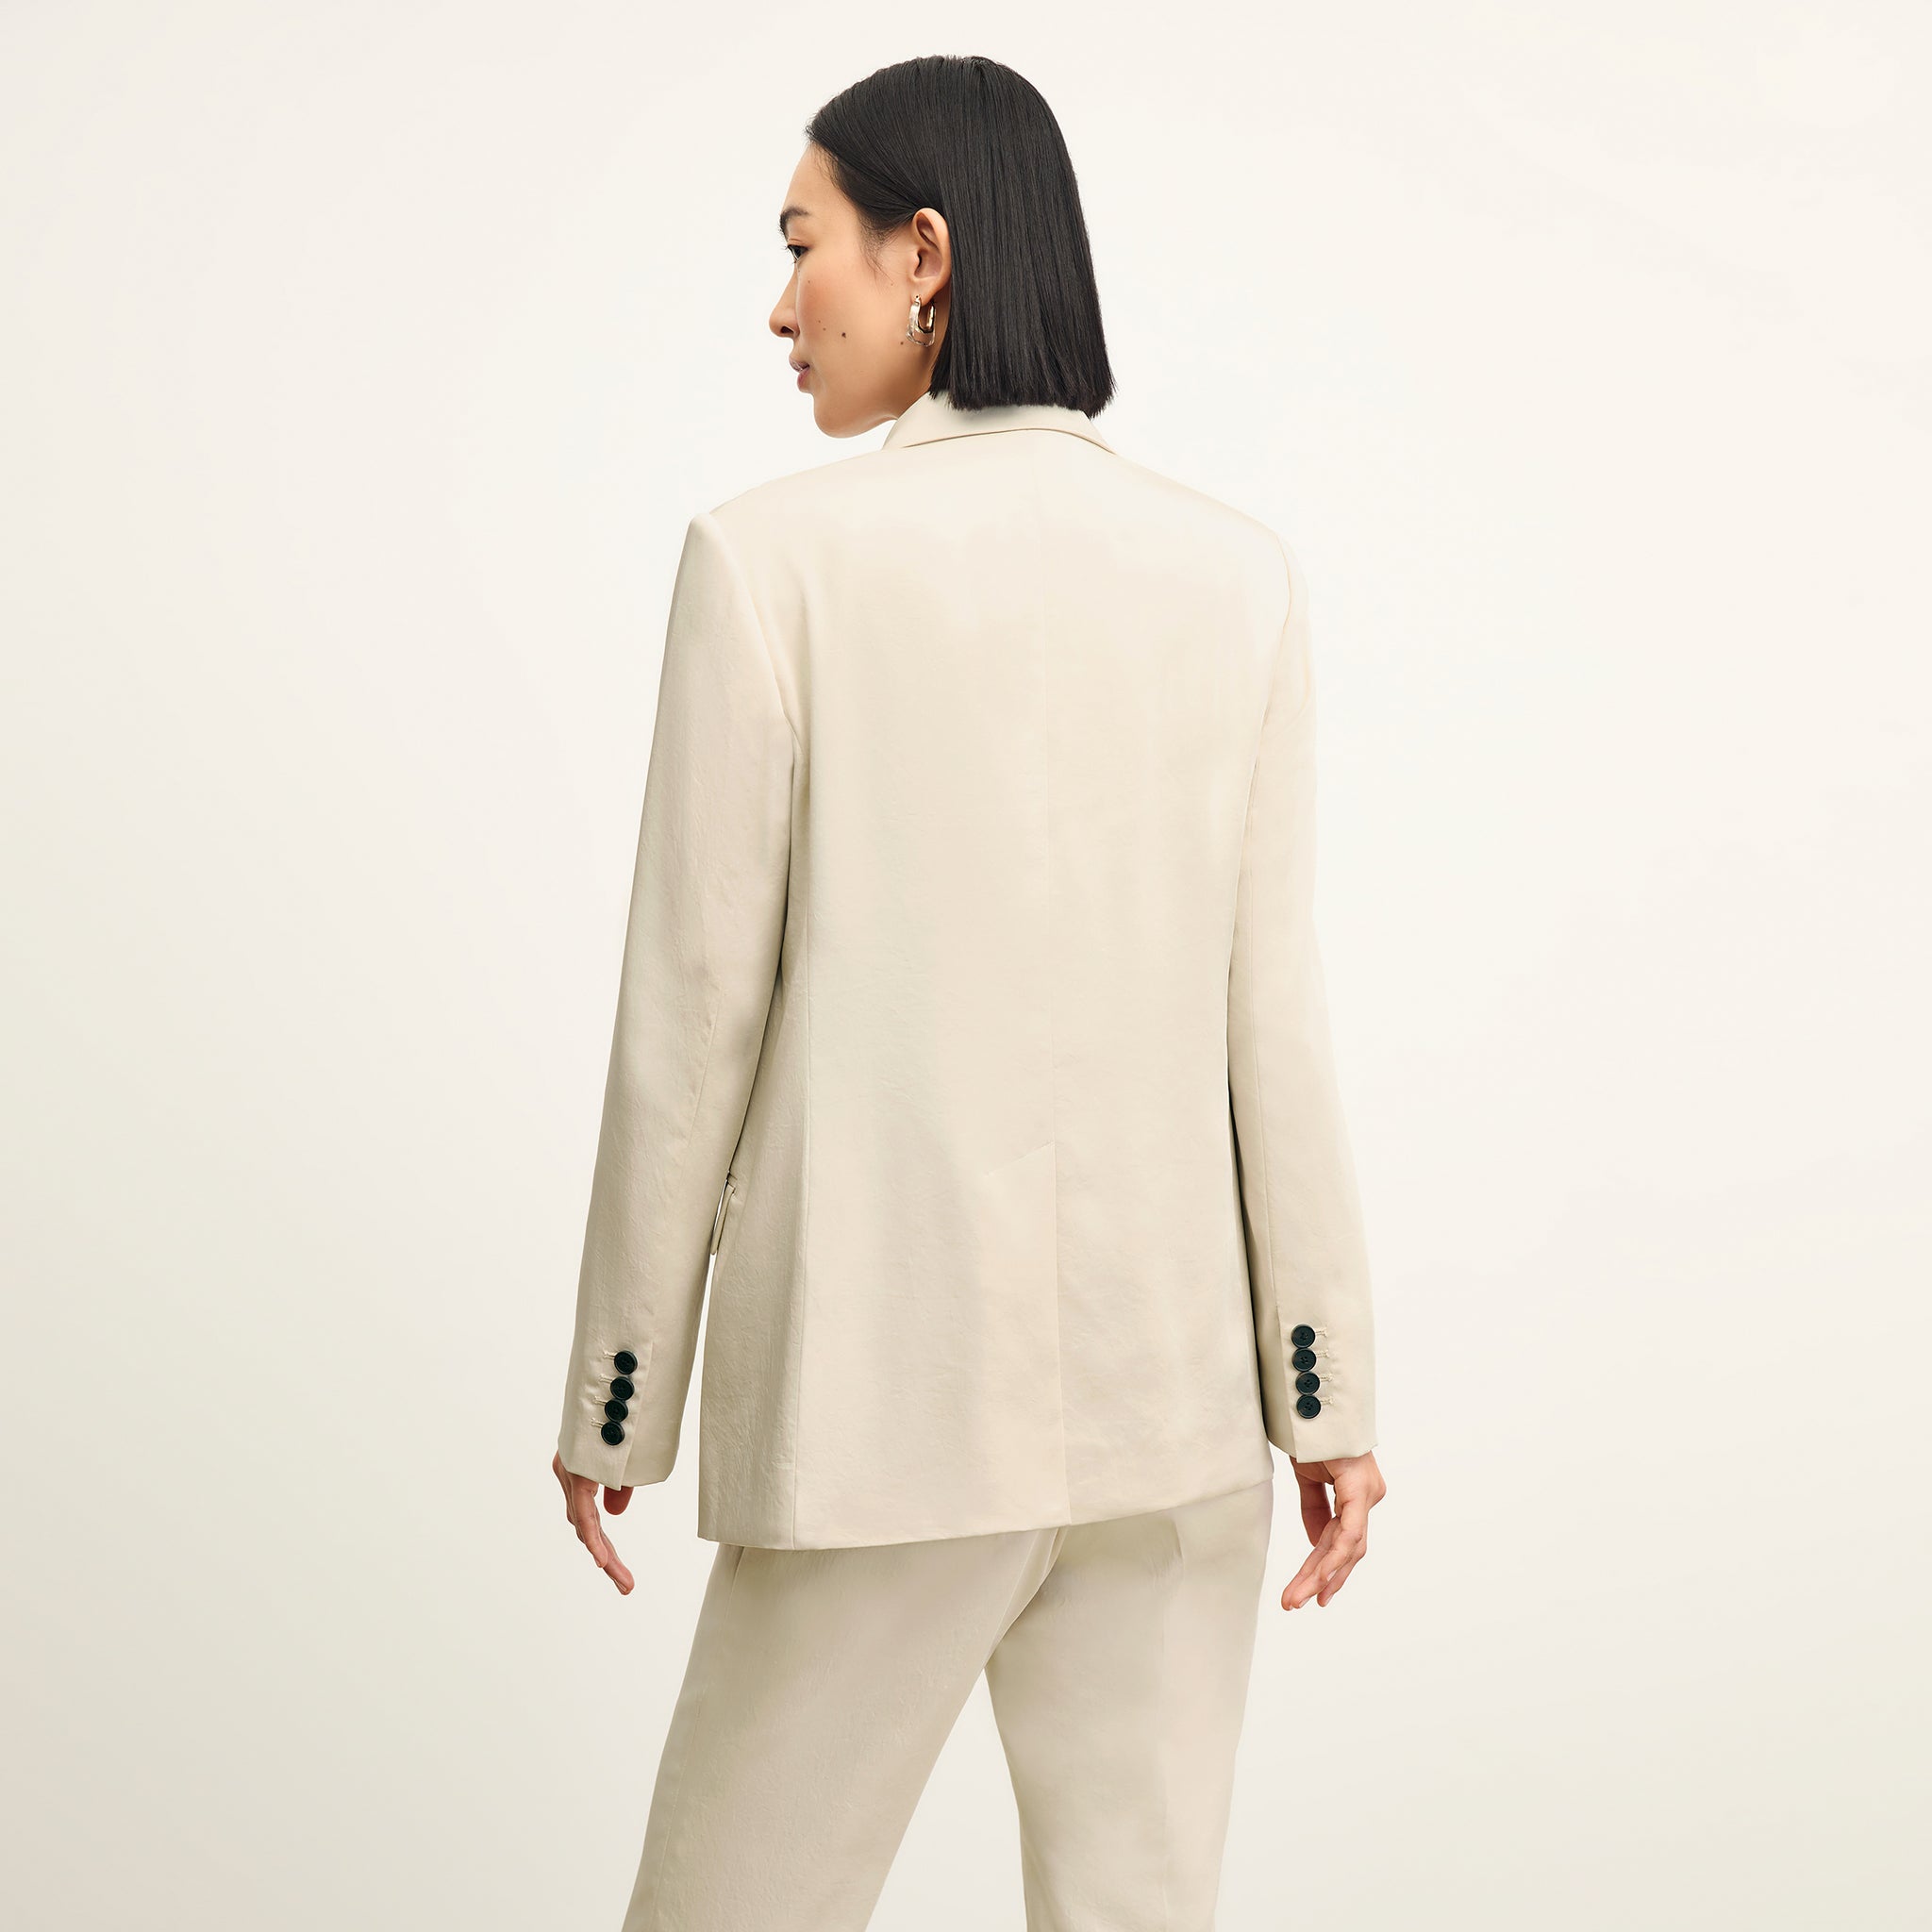 Back image of a woman wearing the o'hara jacket in champagne